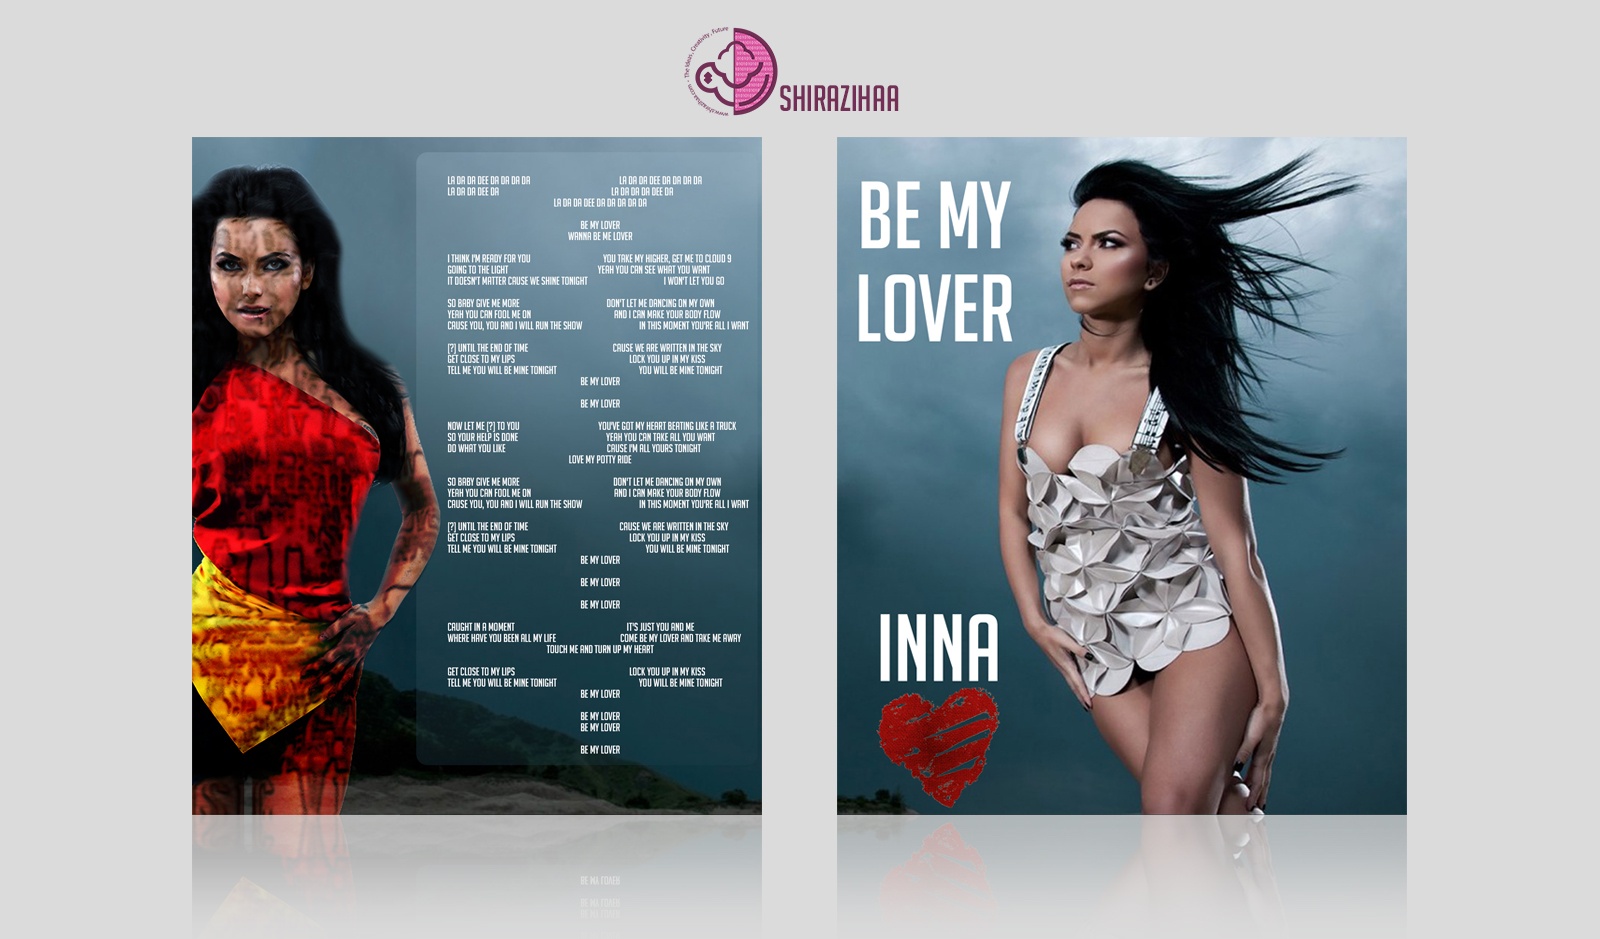 Inna - Be My Lover box cover